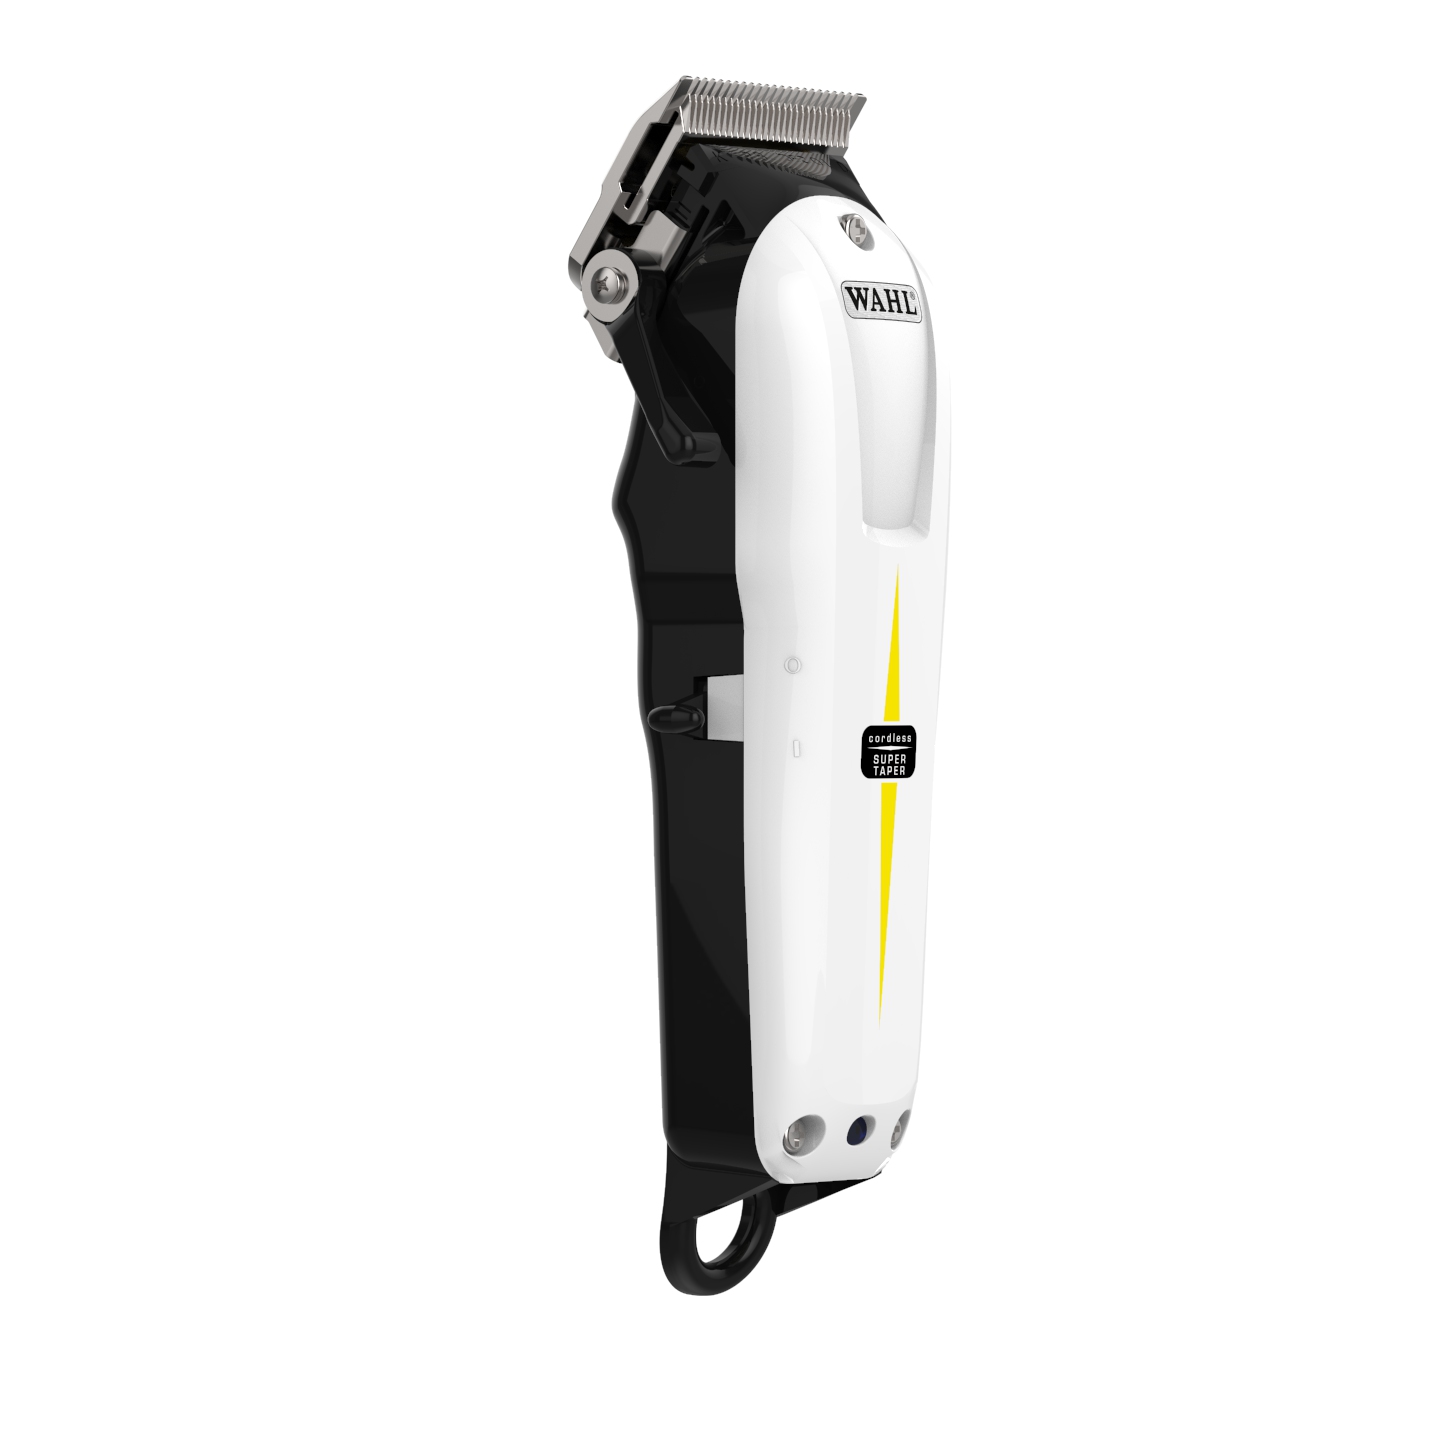 Wahl Super Taper, Professional Barber clipper powered by built-in  rechargeable batteries which last about 80-90 minutes uninterruptable  usage, Manufacturer: Wahl [4219-0470] - €117.00 : , Online  Store